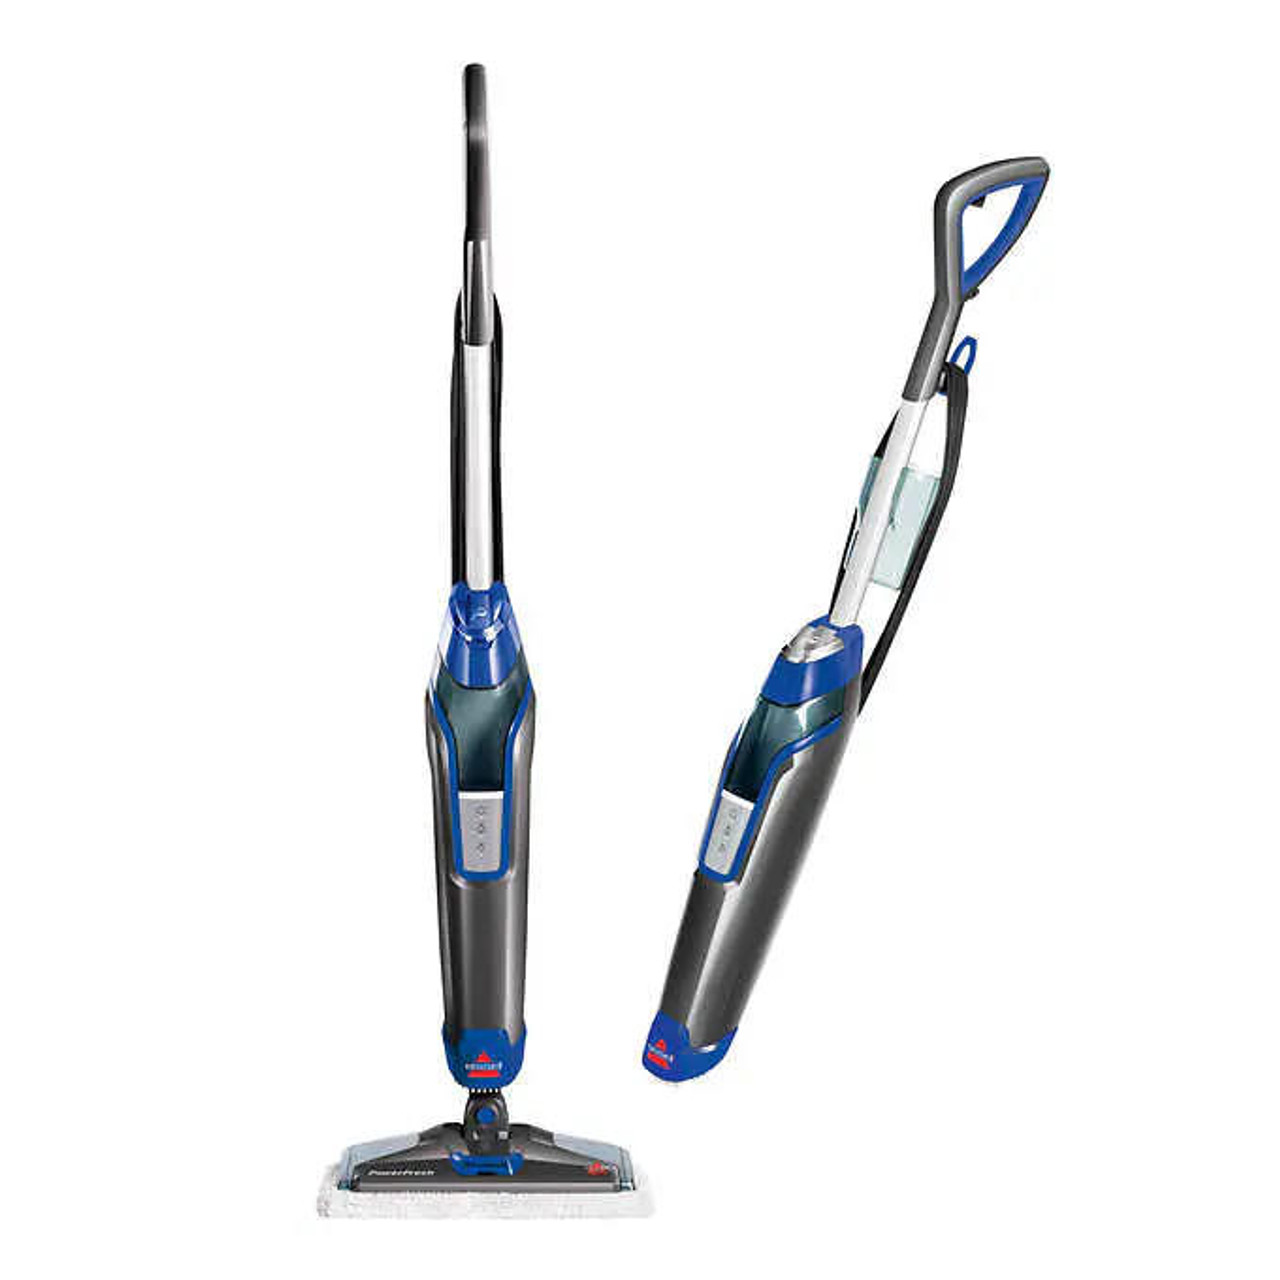 Bissell PowerSteamer Deluxe Steam Mop - Tough Mess Remover, Germ Eliminator, and Microfiber Pads Included
-Chicken Pieces